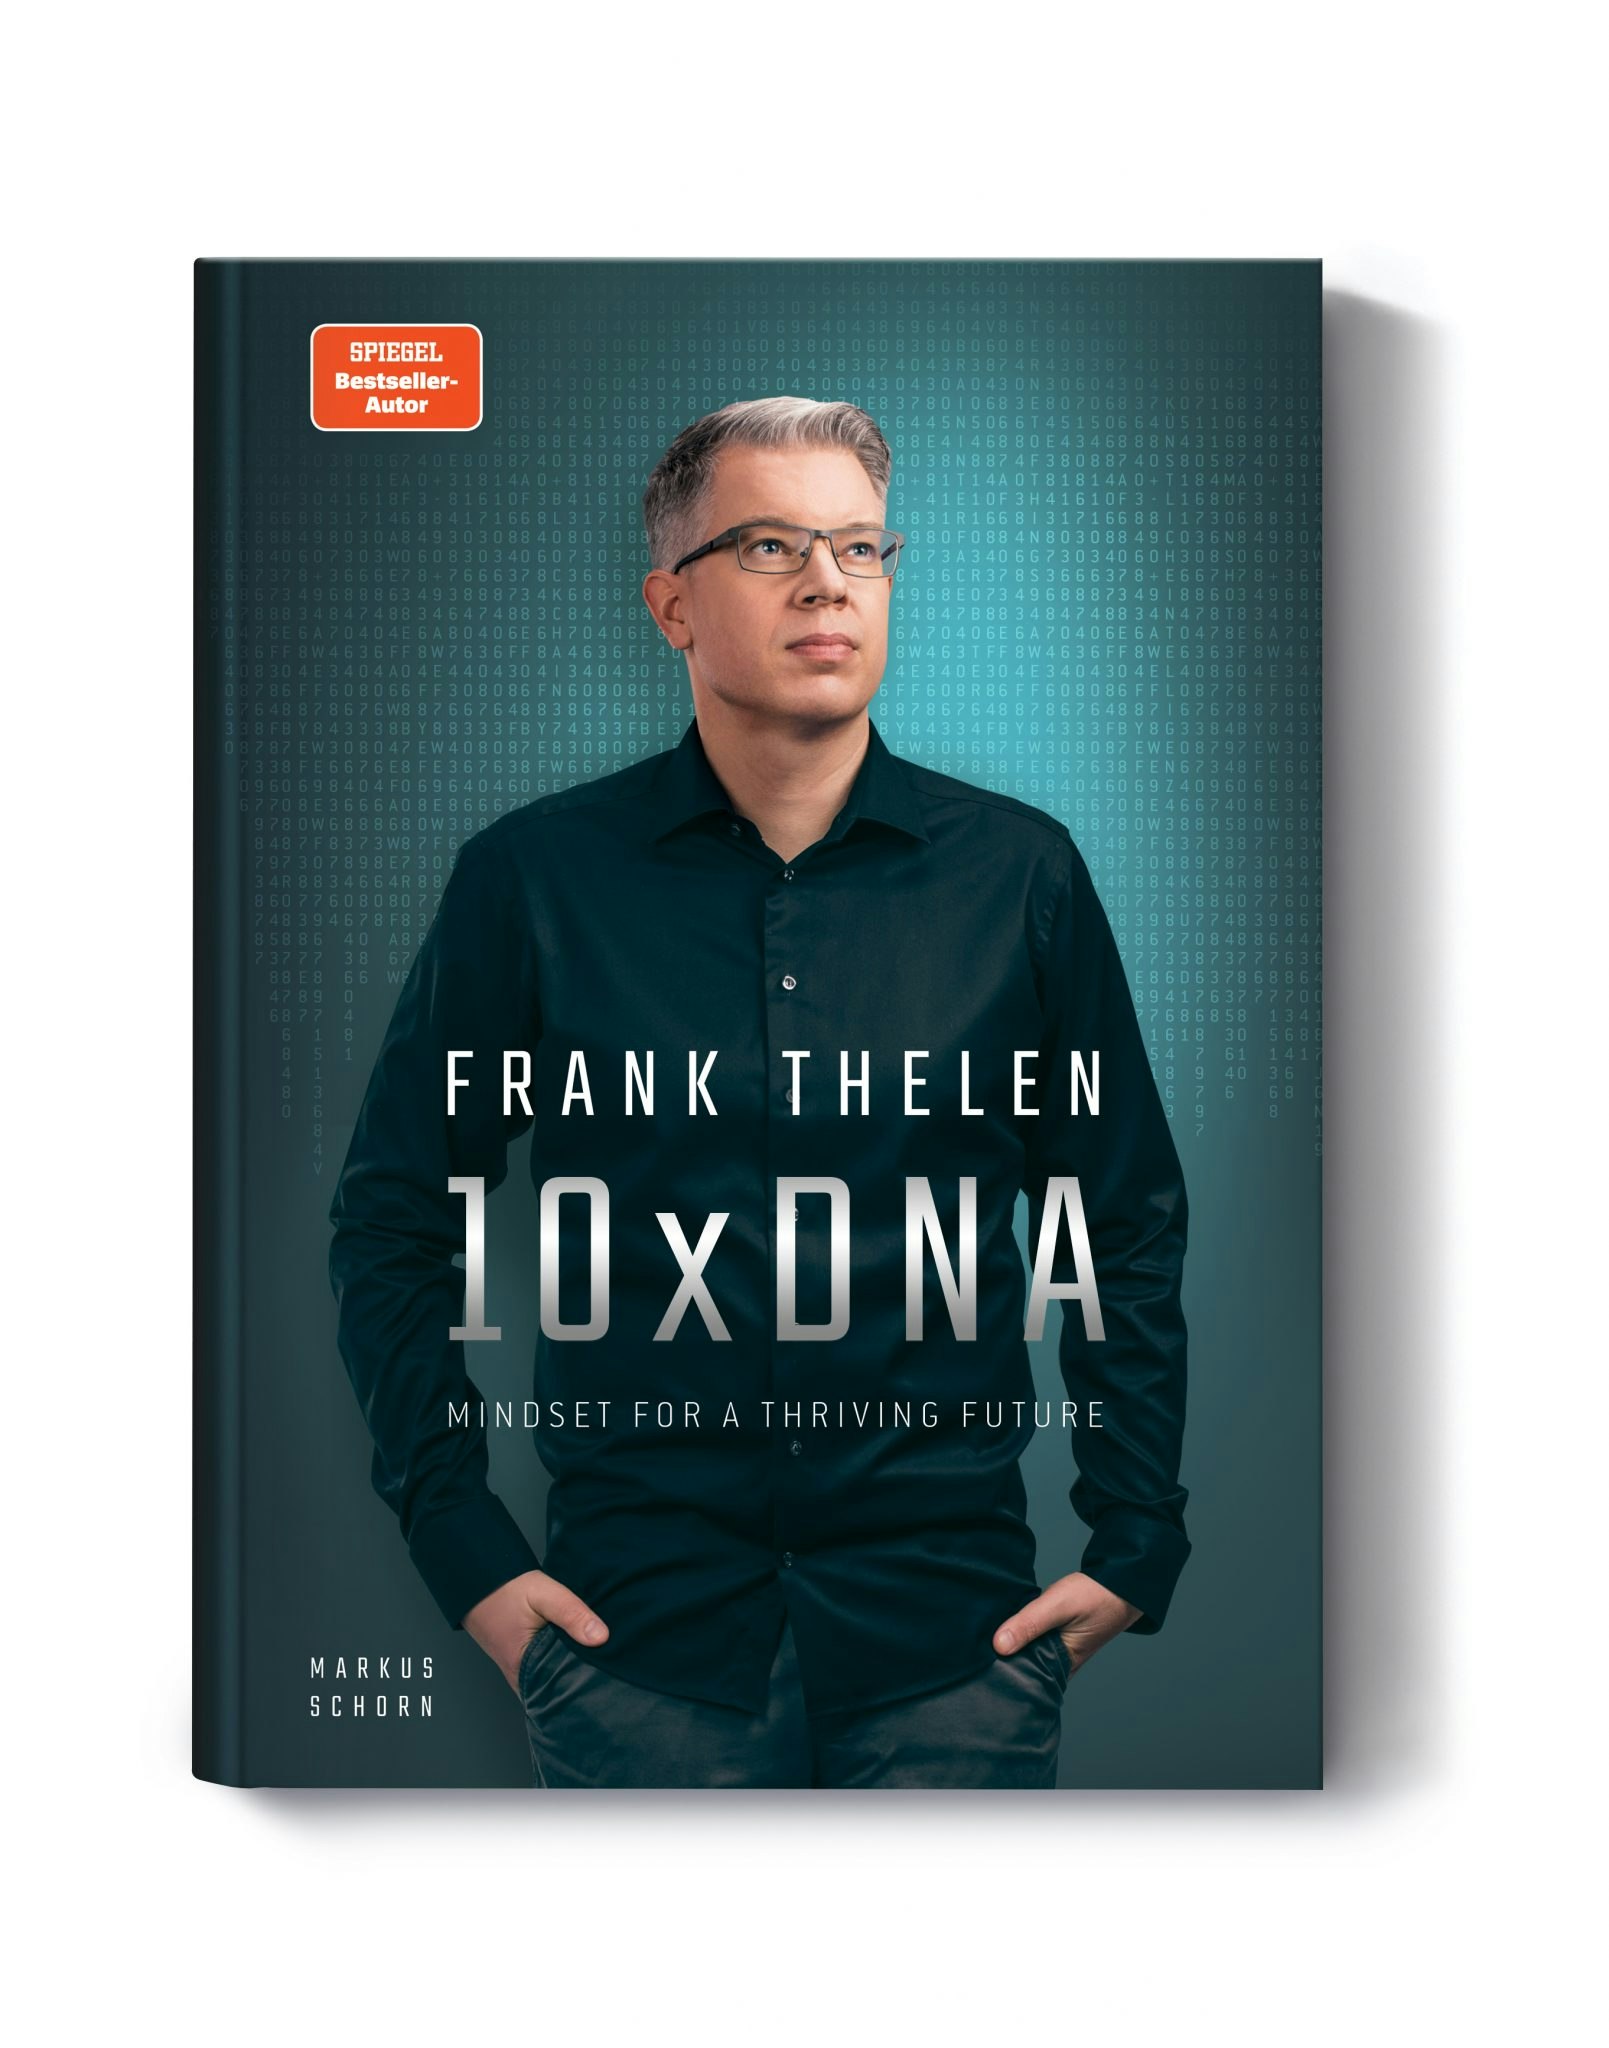 Frank Thelen's book 10x DNA